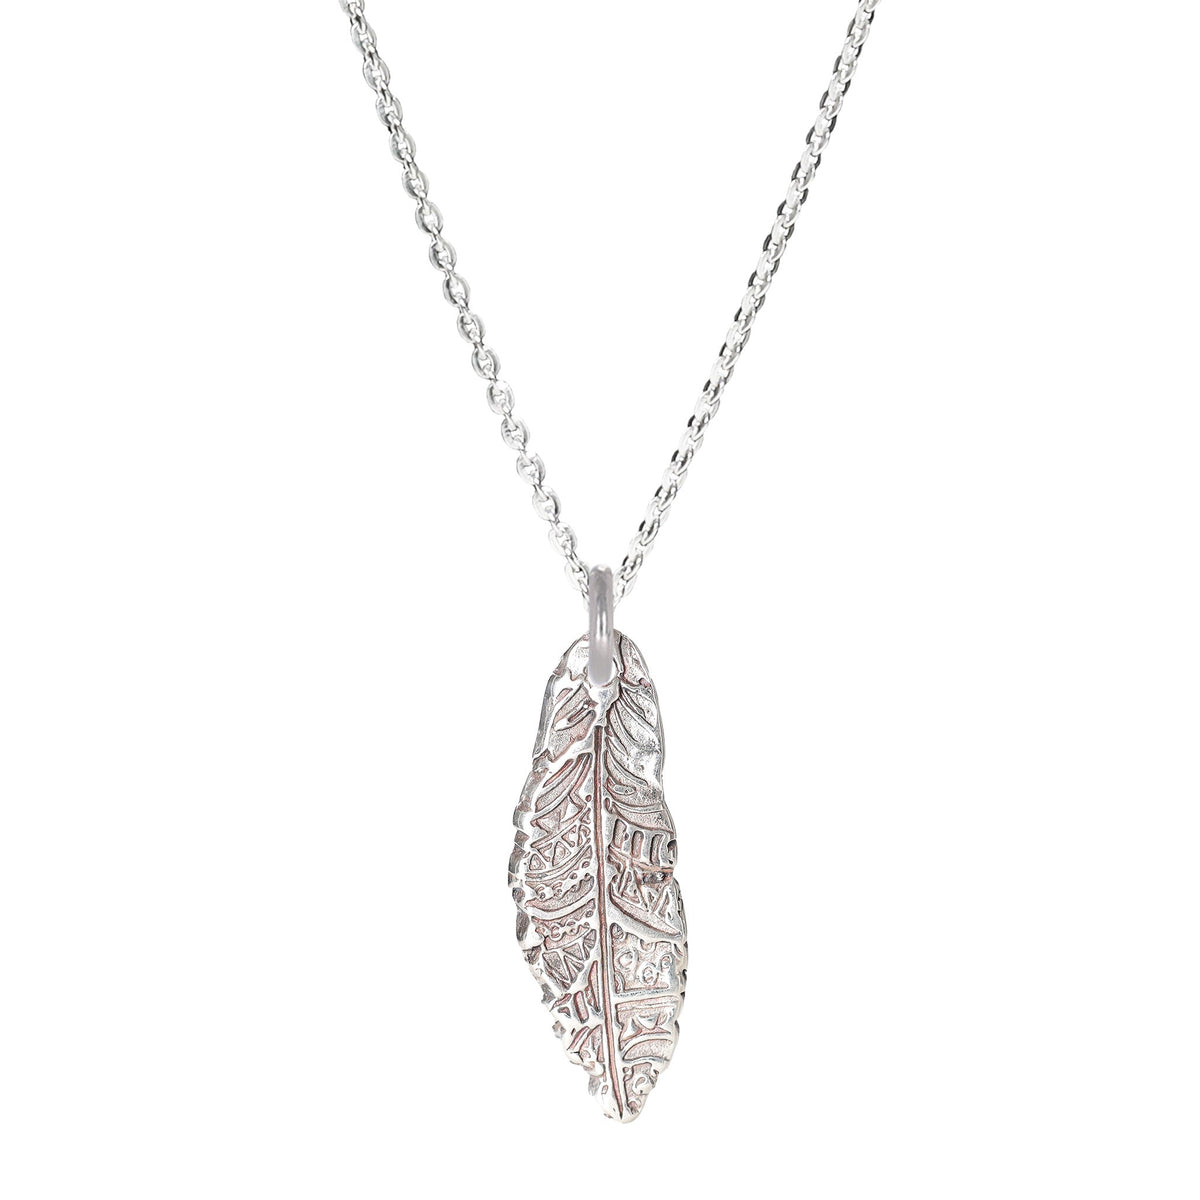 Feather Textured Small Sterling Silver Necklace on a Sterling Silver Cable Chain